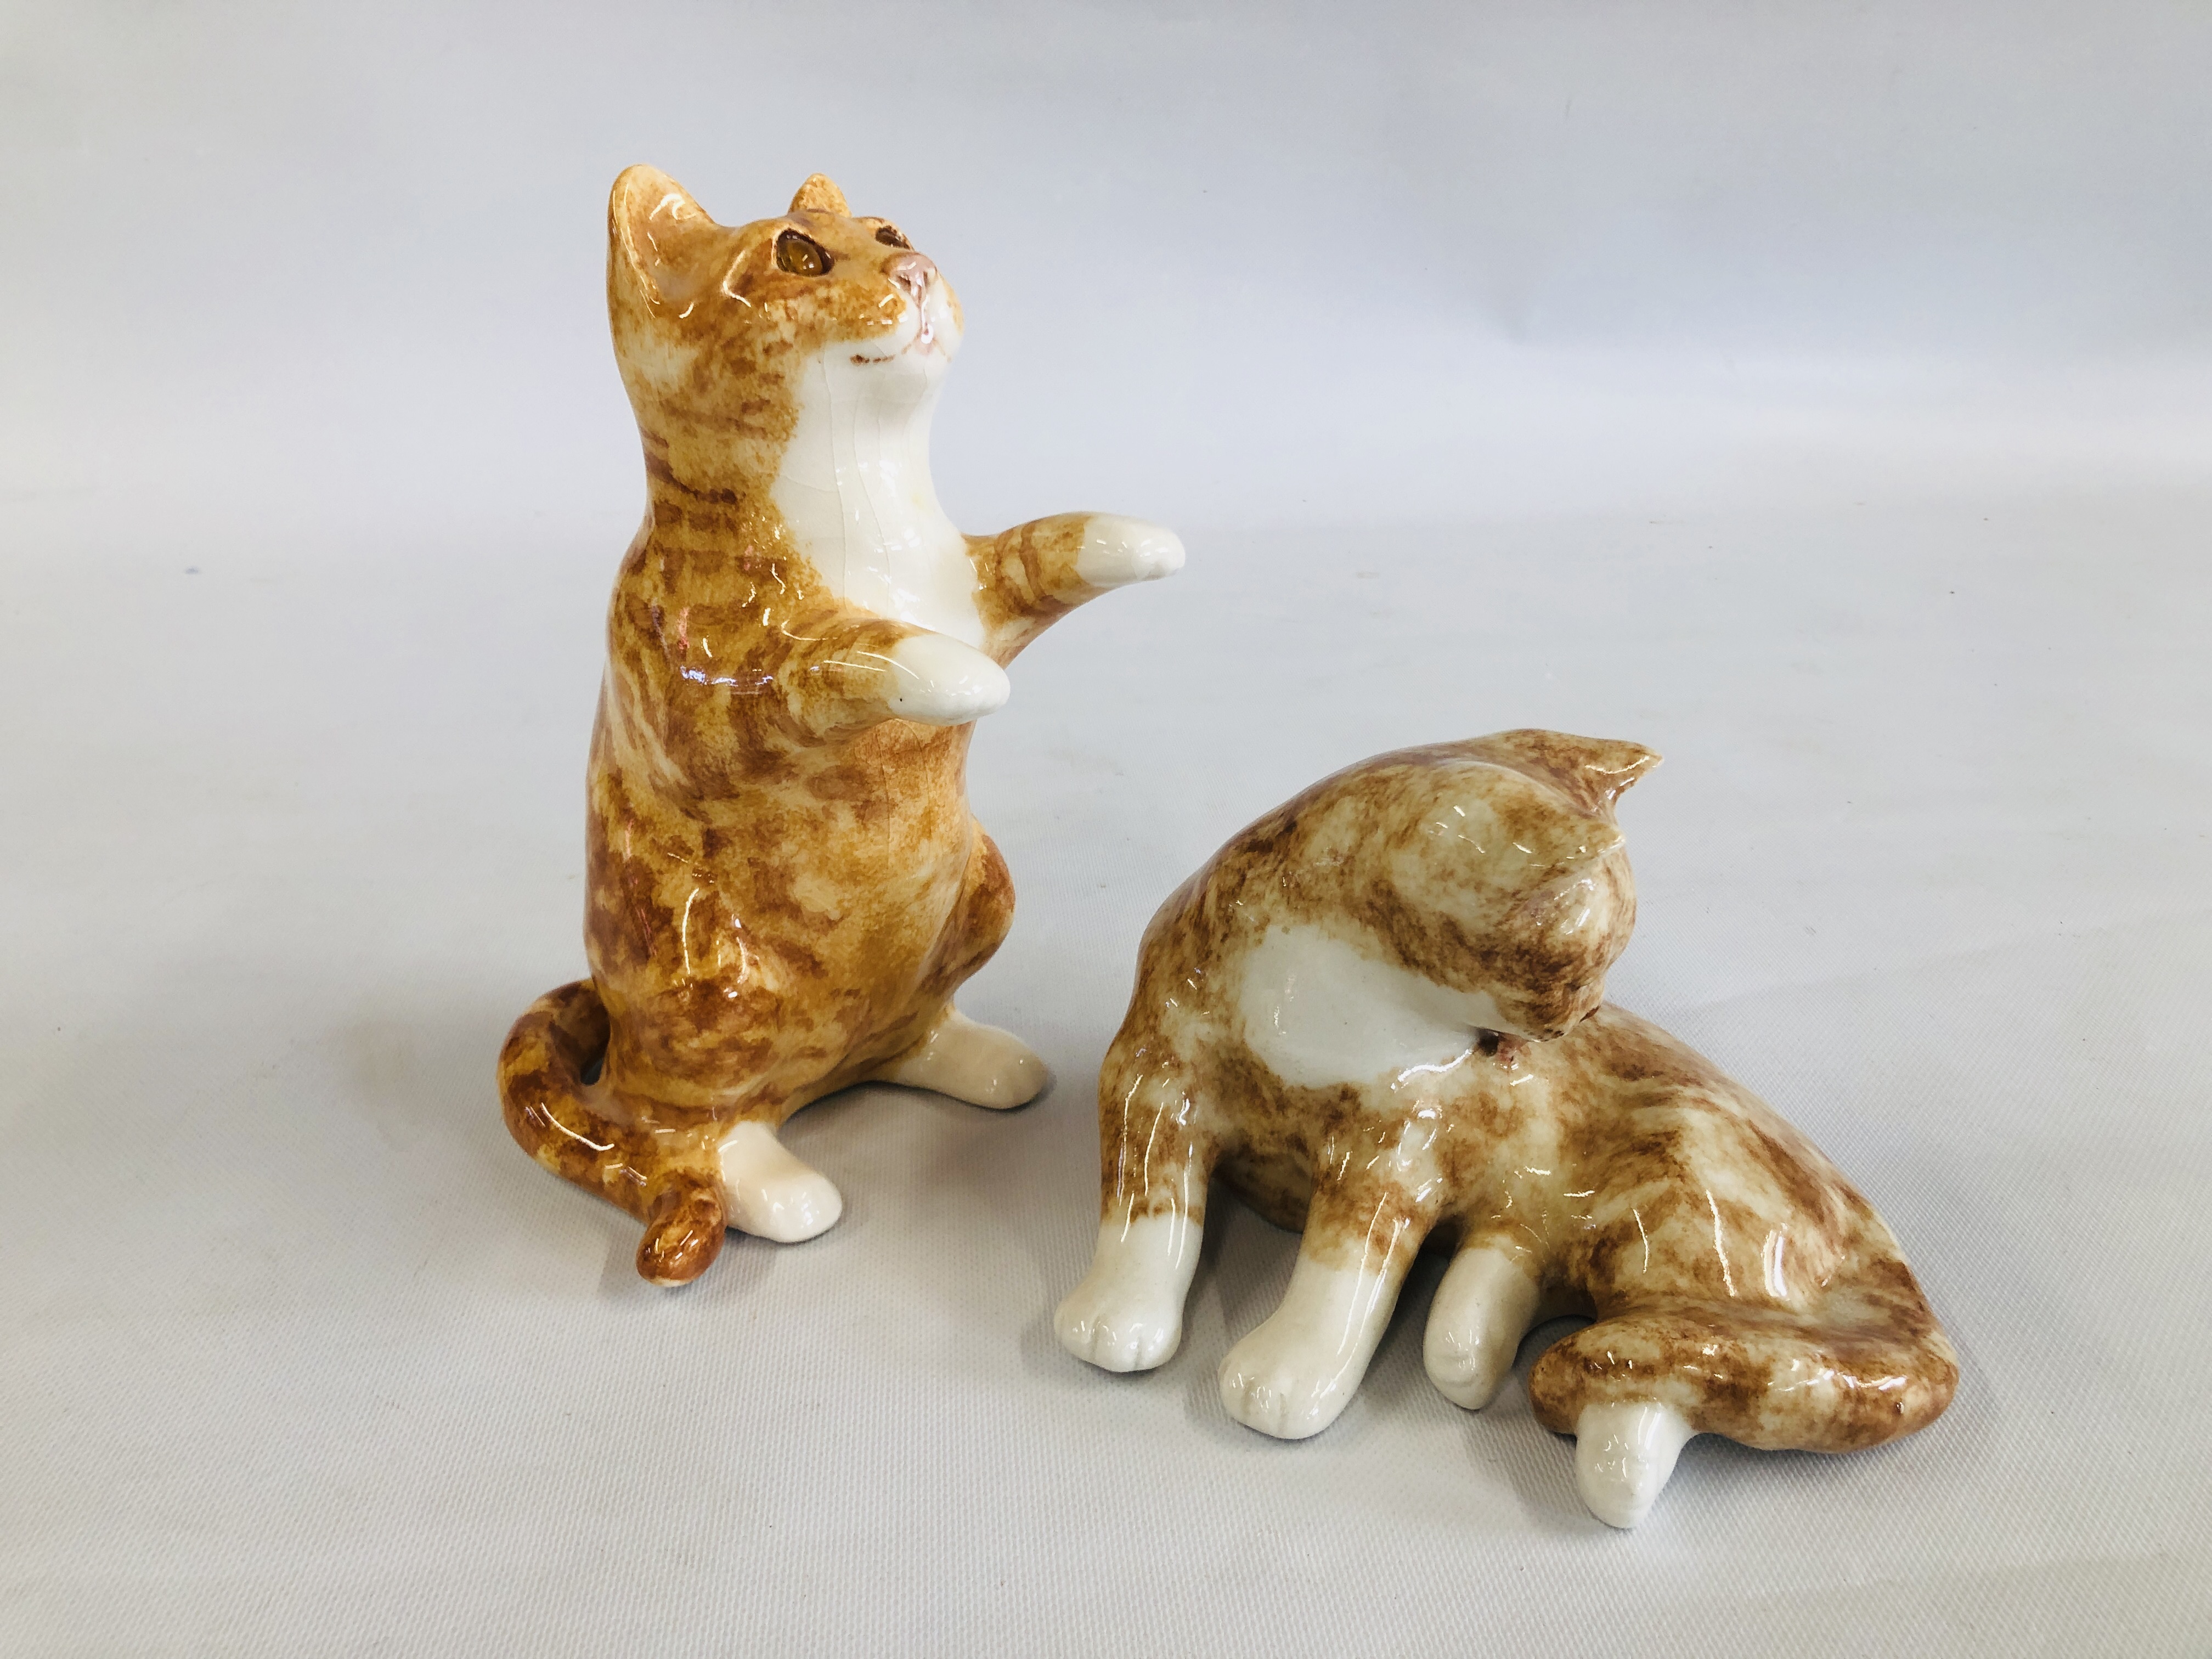 A WINSTANLEY POTTERY EXAMPLE OF A TABBY CAT "STANDING ON HIND LEGS" BEARING SIGNATURE TO THE BASE,